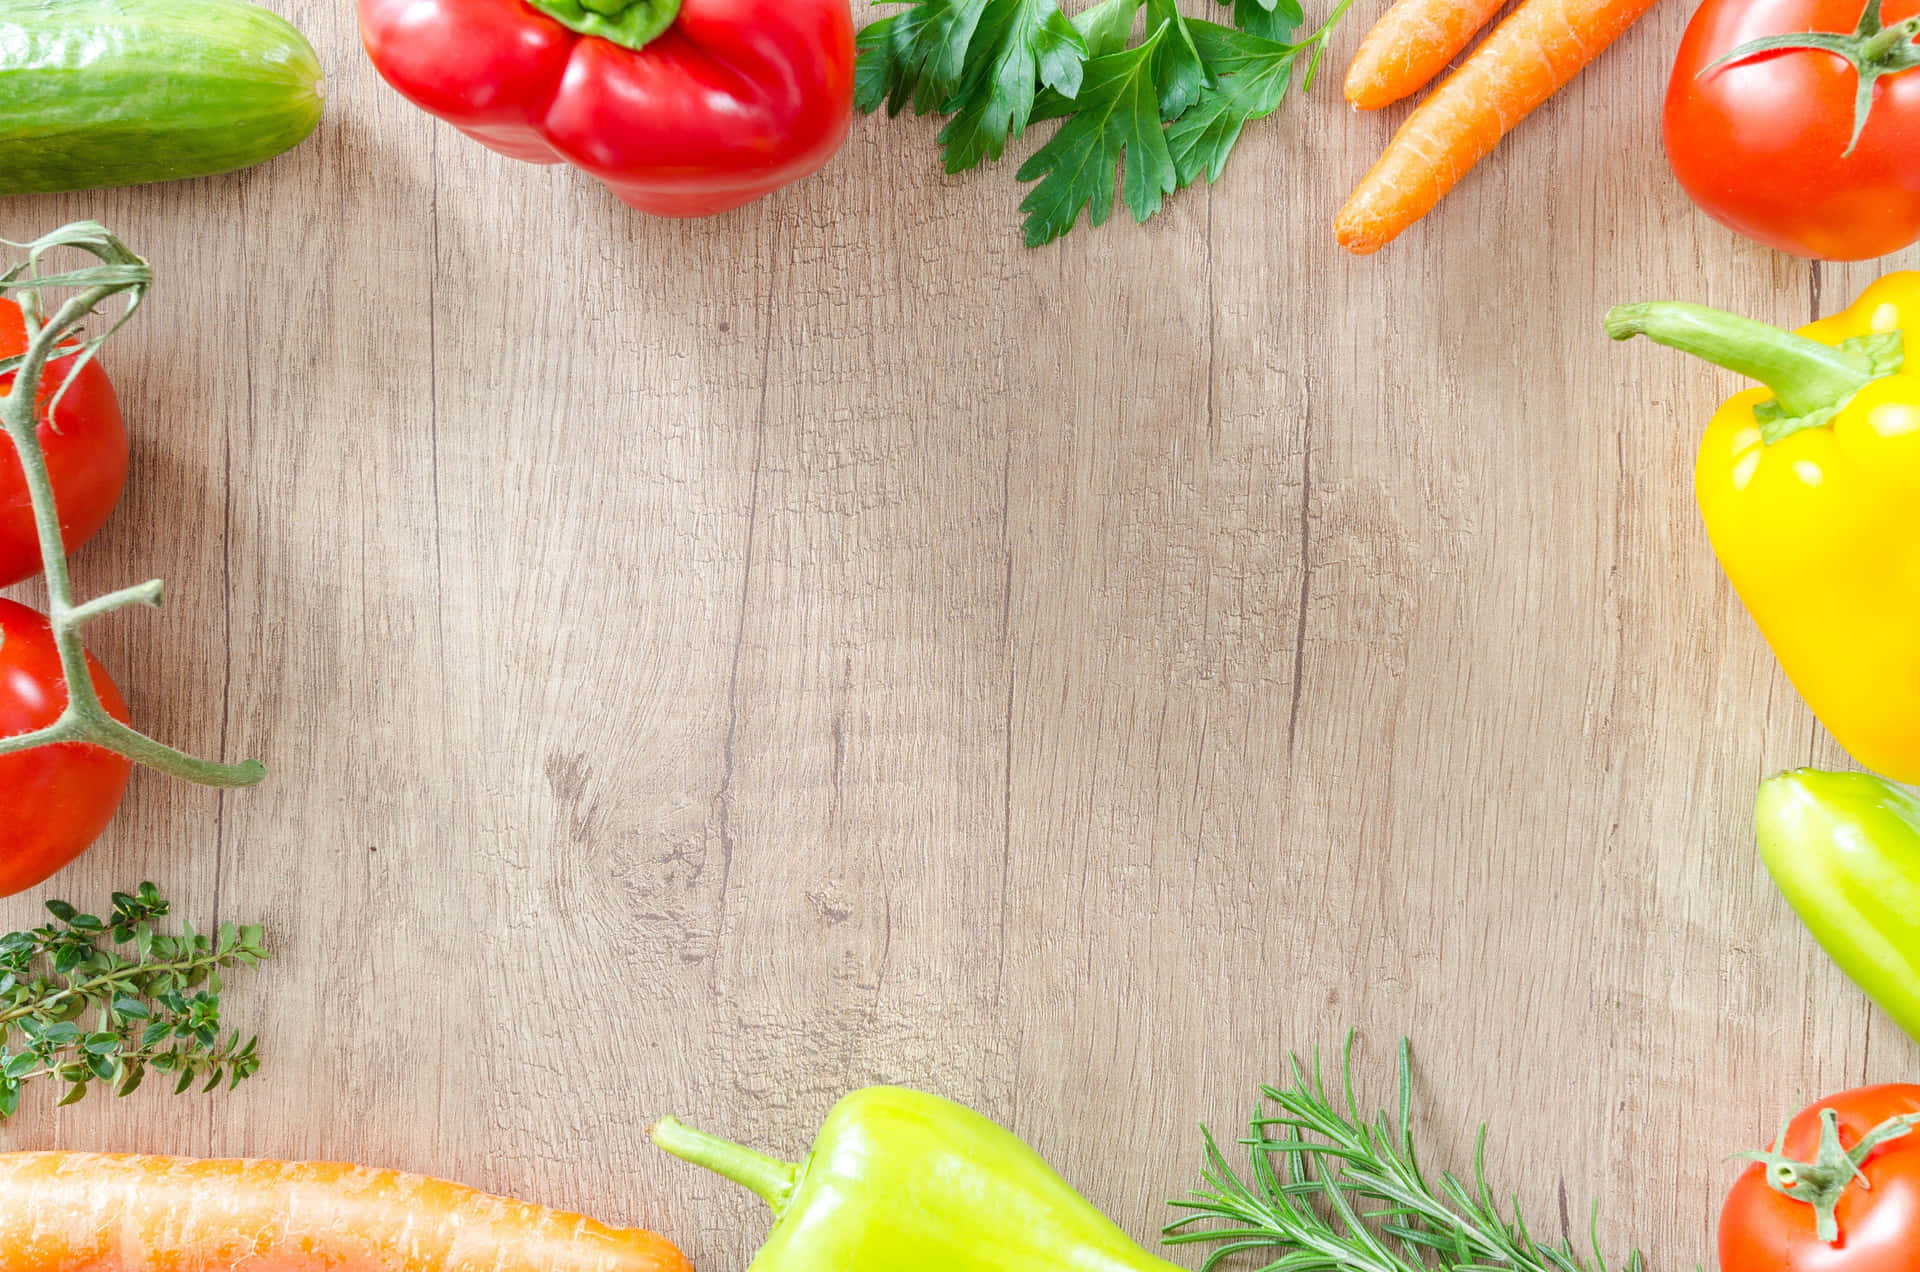 Healthy Food Vegetable Border On Wood Picture